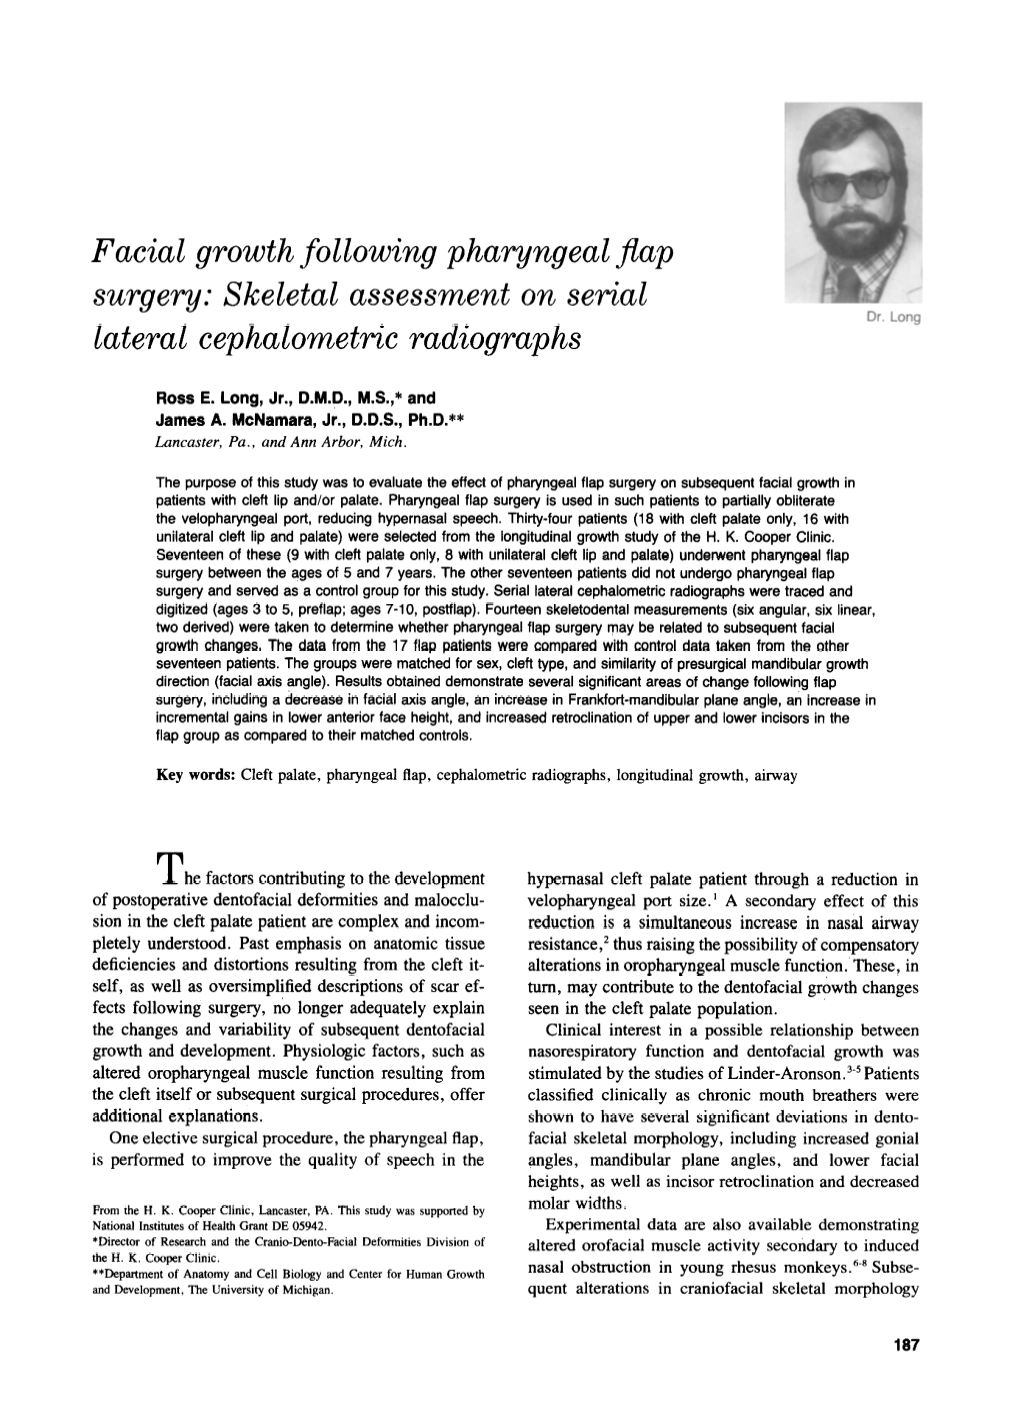 Facial Growth Following Pharyngeal Flap Surgery 189 Number 3